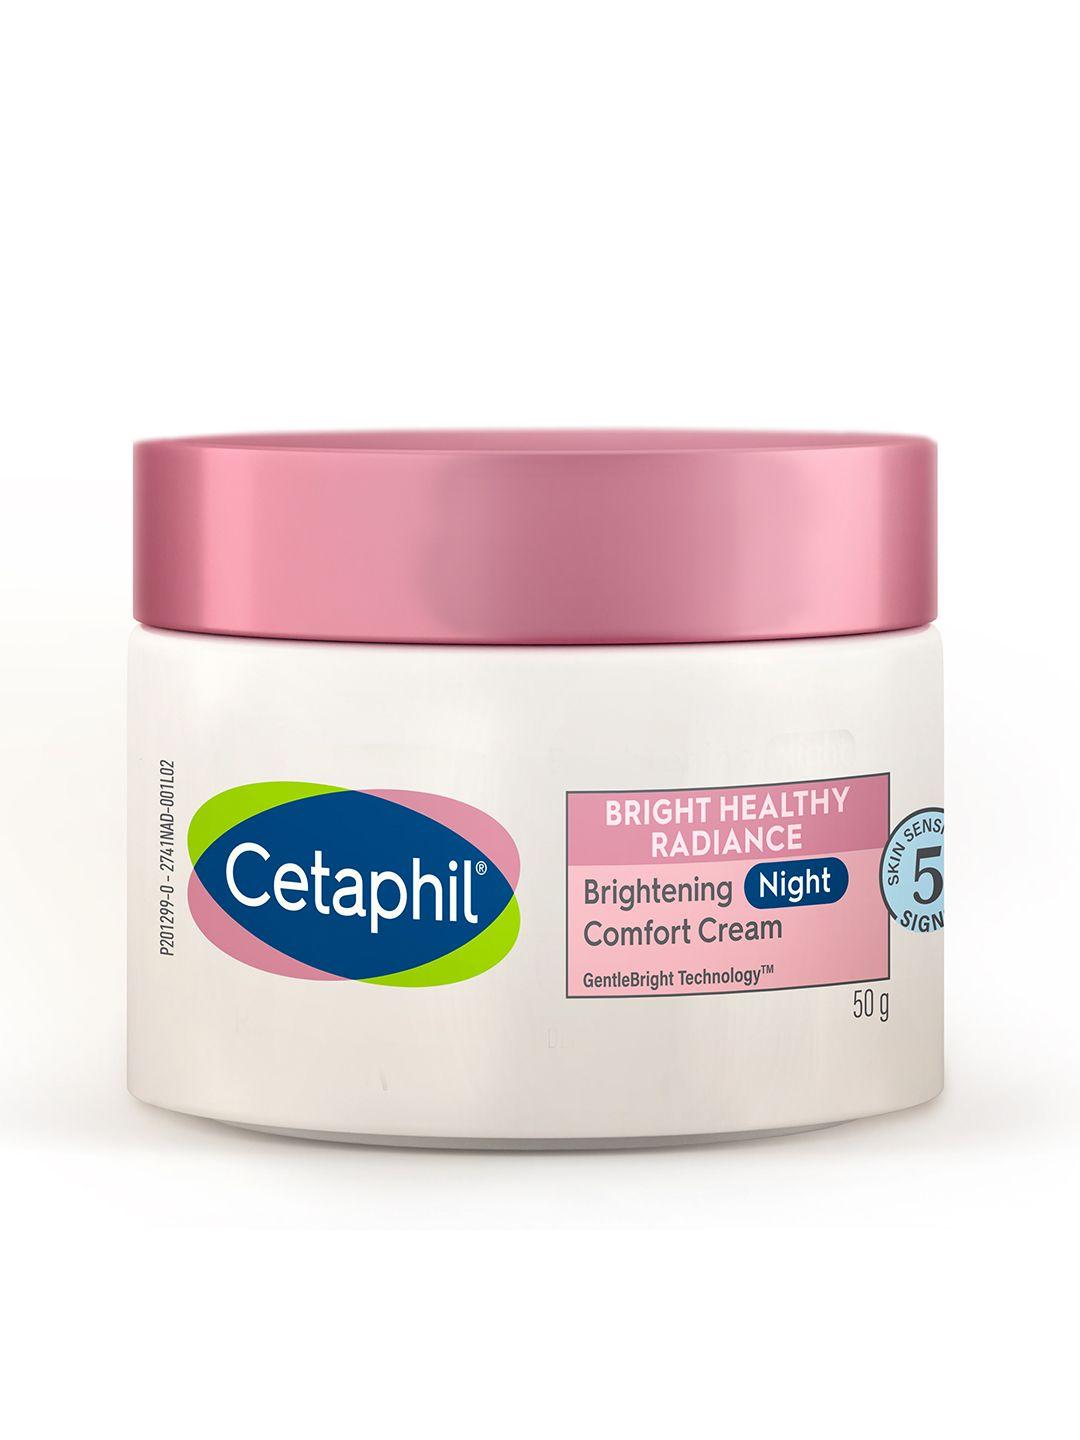 Cetaphil Bright Healthy Radiance Brightening Night Comfort Cream with Sea Daffodil - 50 g